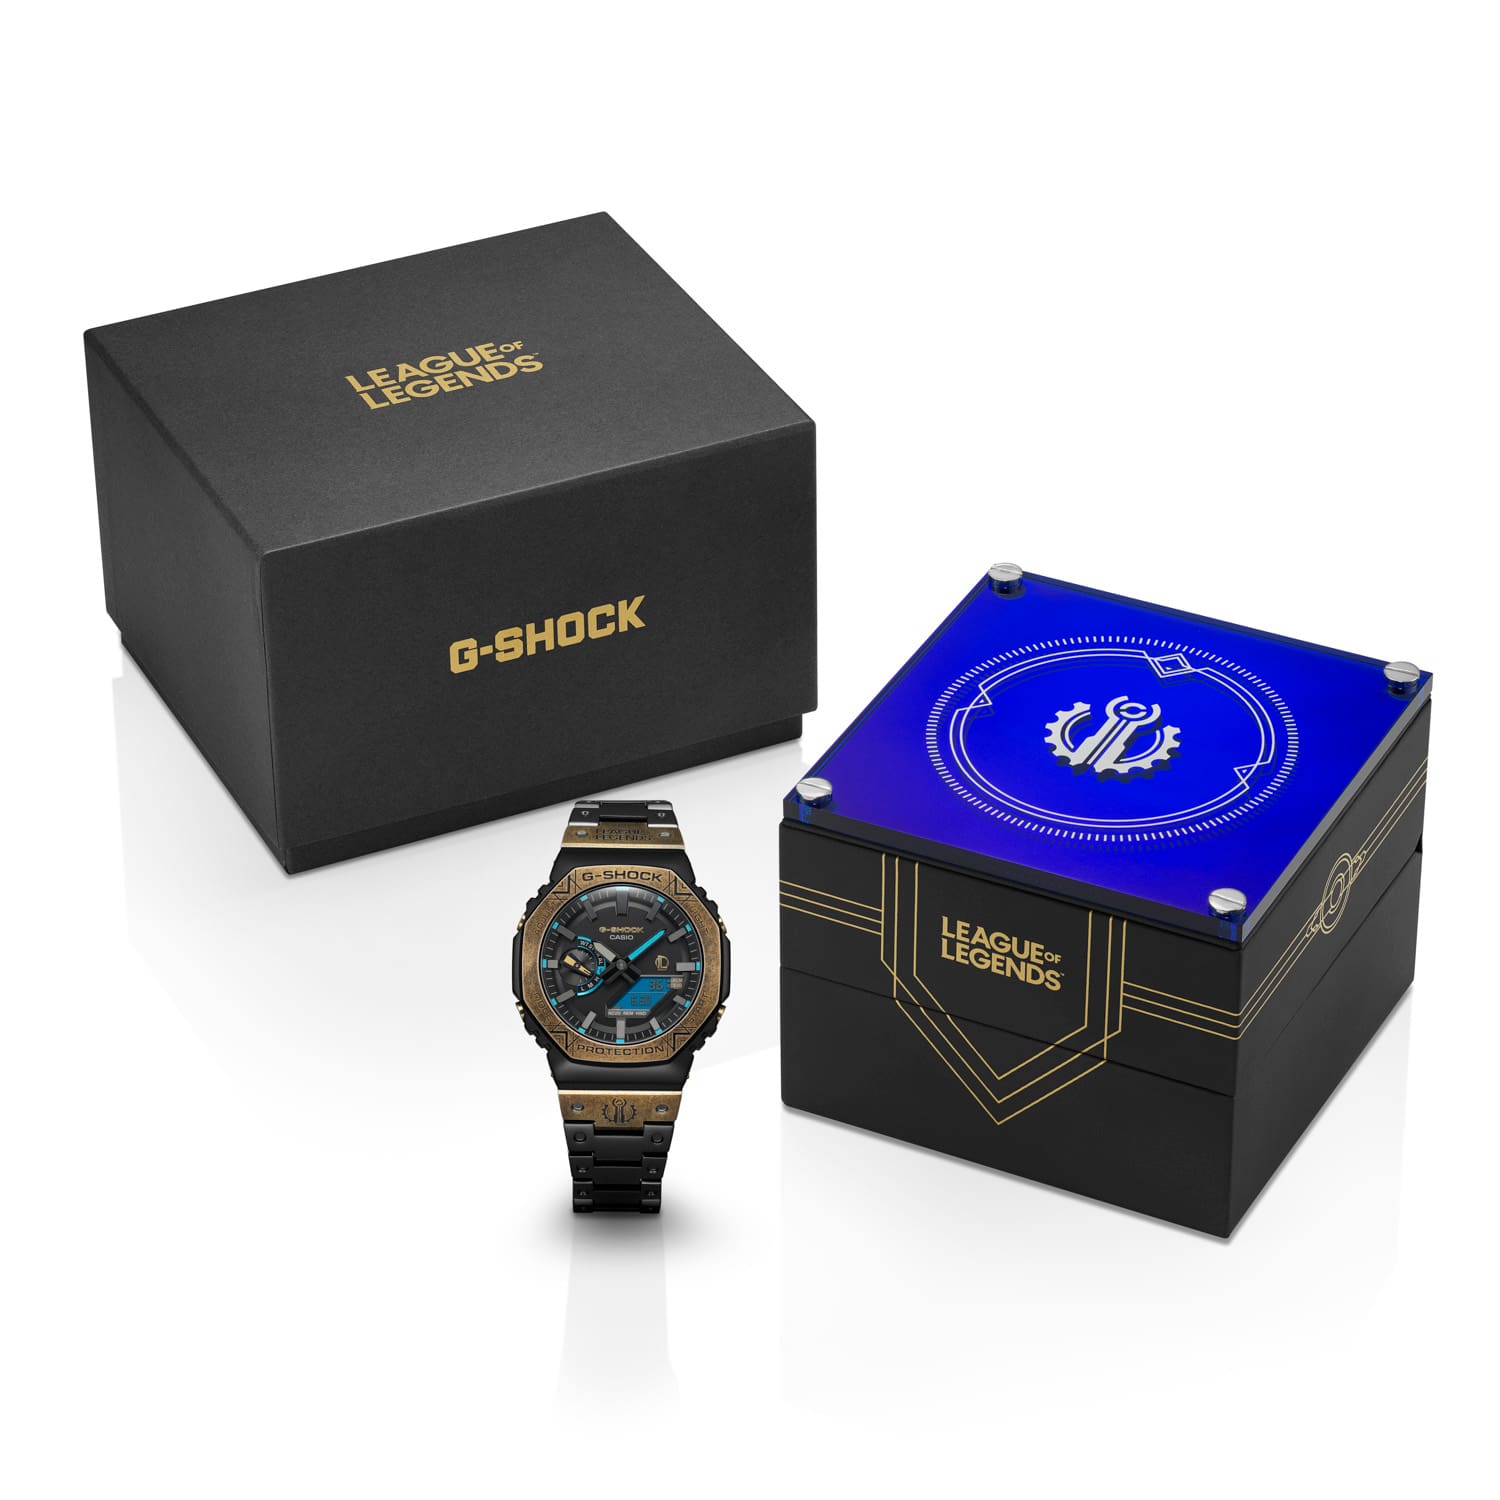 League of Legends GM-B2100LL-1A watch and packaging